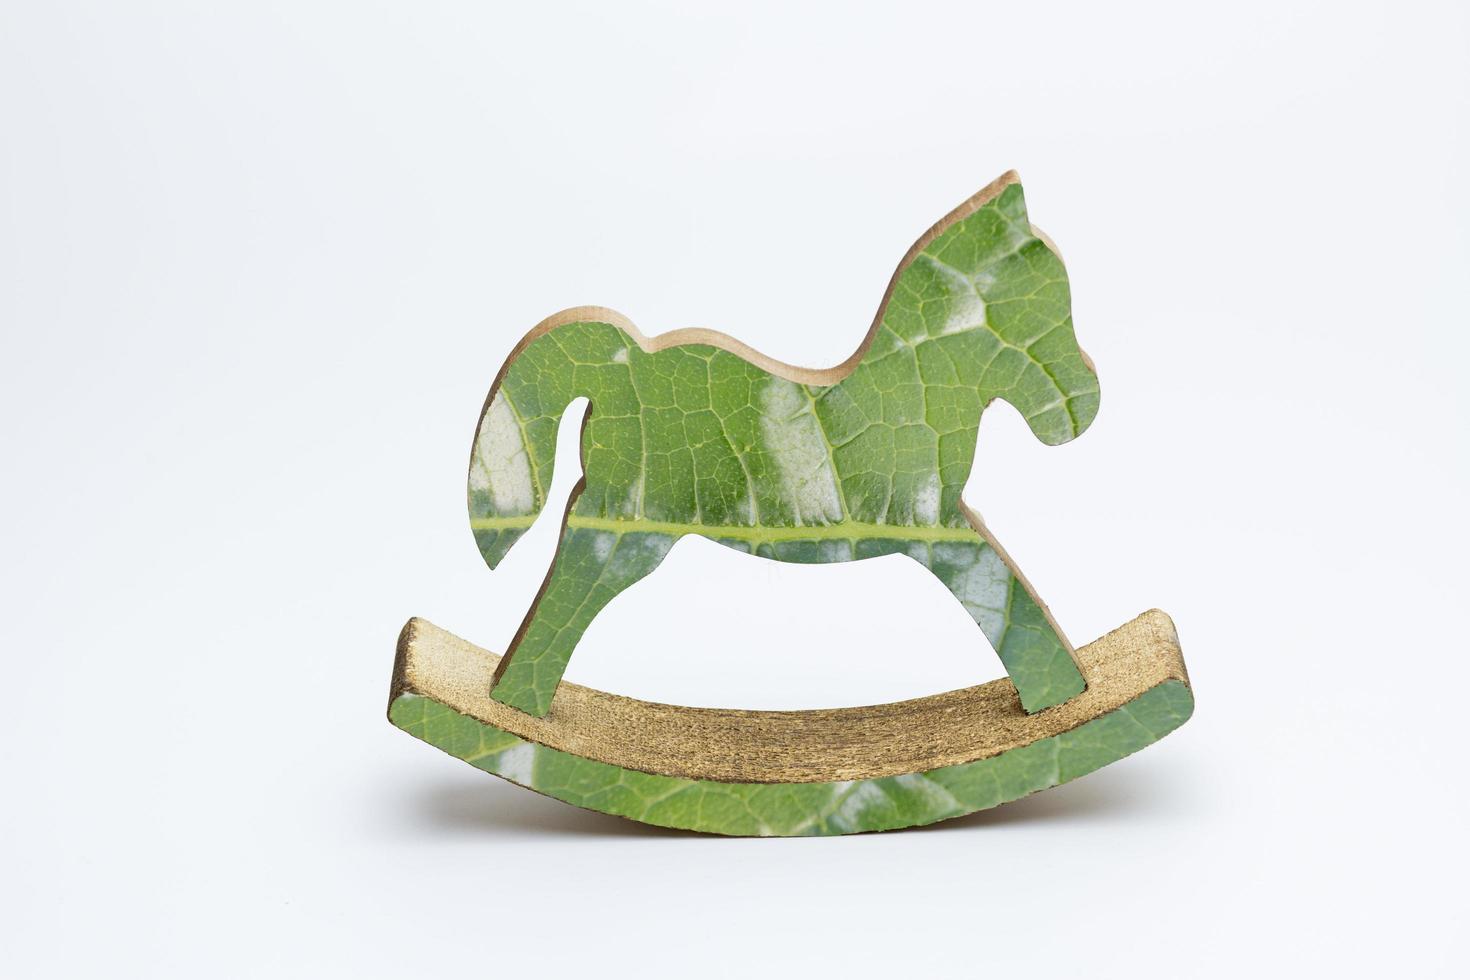 A decorative rocking horse toy on a white background photo